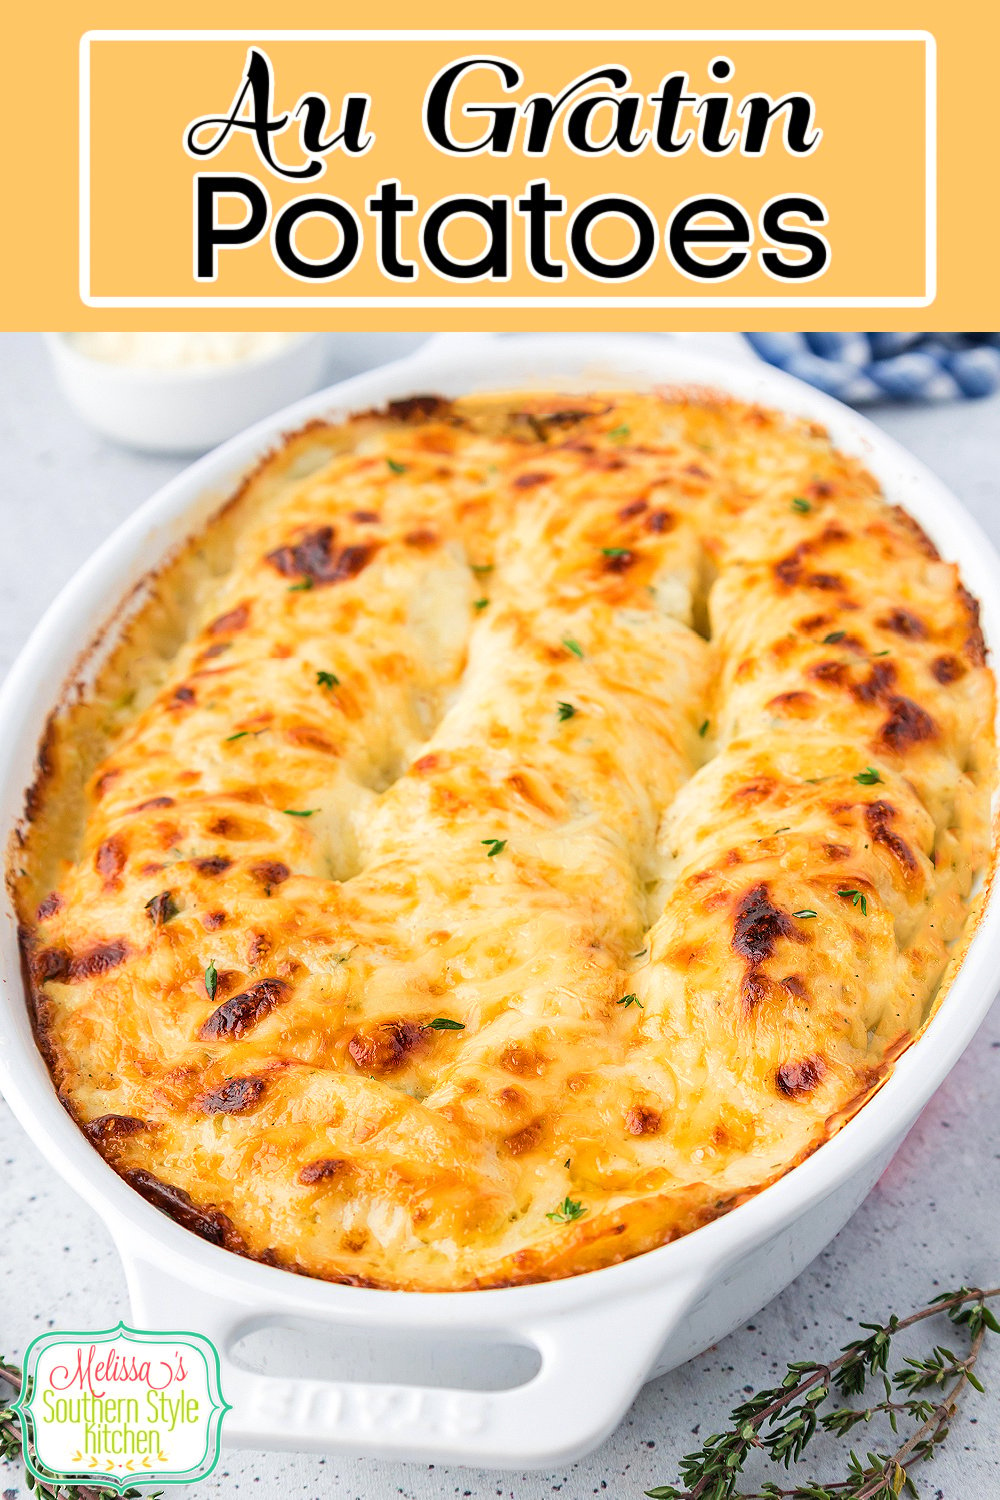 These decadent Au Gratin Potatoes are the ideal side dish for any special occasion #augratinpotatoes #scallopedpotatoes #potatocasserole #easypotatorecipes #bakedscallopedpotatoes #augratinpotatoesrecipe